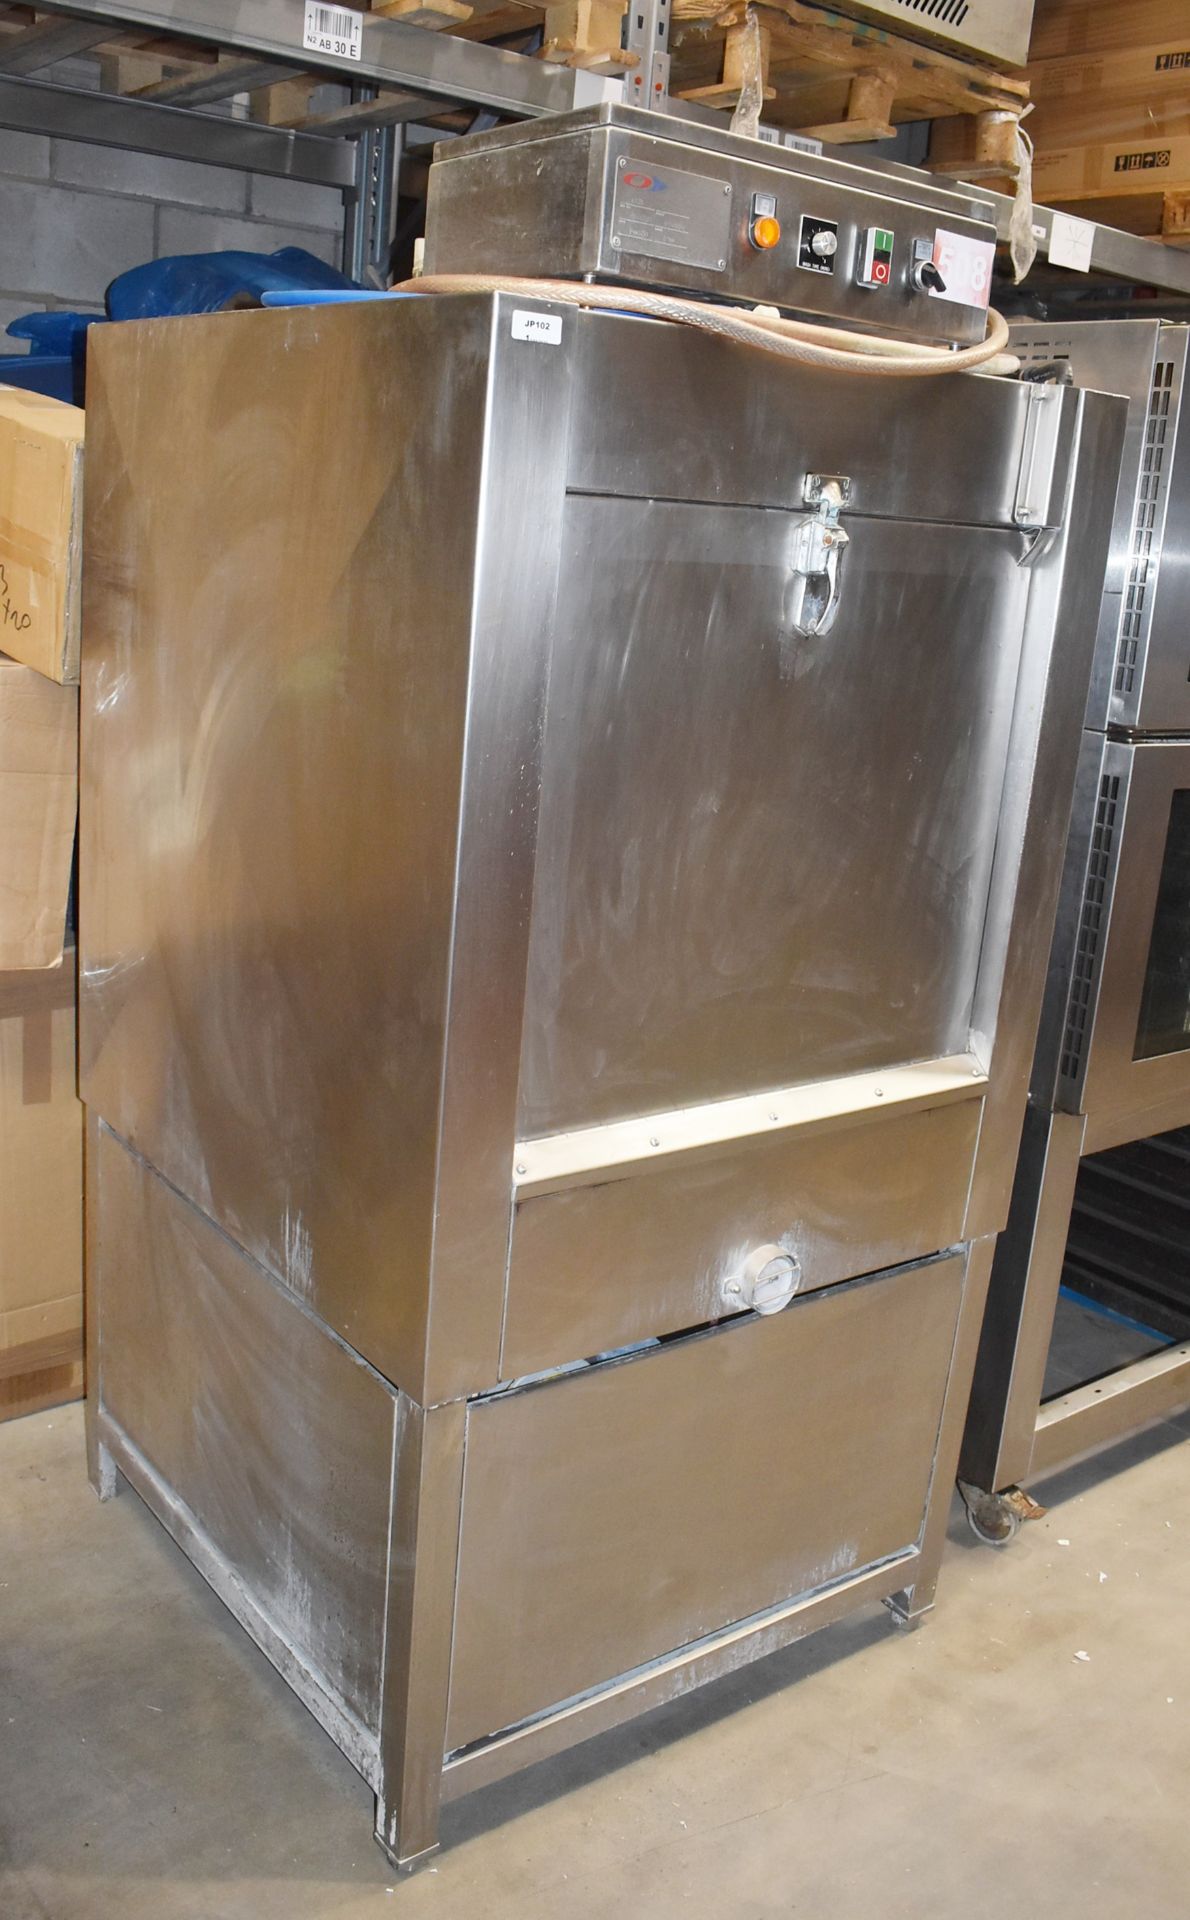 1 x Oliver Douglas Panamatic 500 Industrial Washing Machine For Commercial Kitchen Environments - St - Image 8 of 15